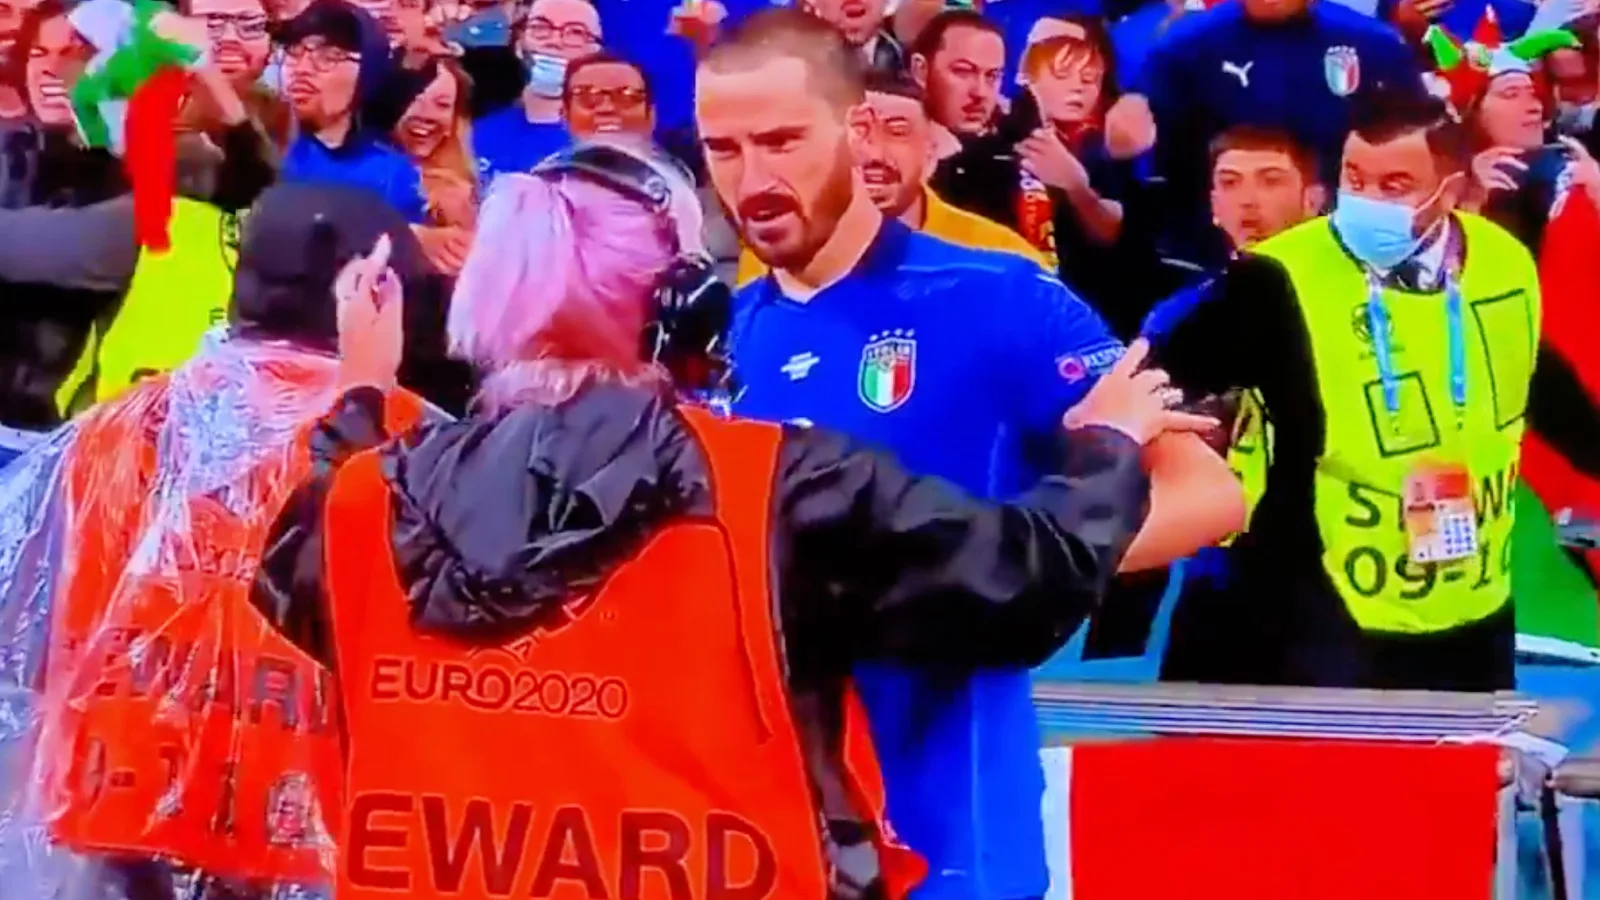 Wembley steward stops Leonardo Bonucci from getting on the pitch after confusing him for a Italy fan